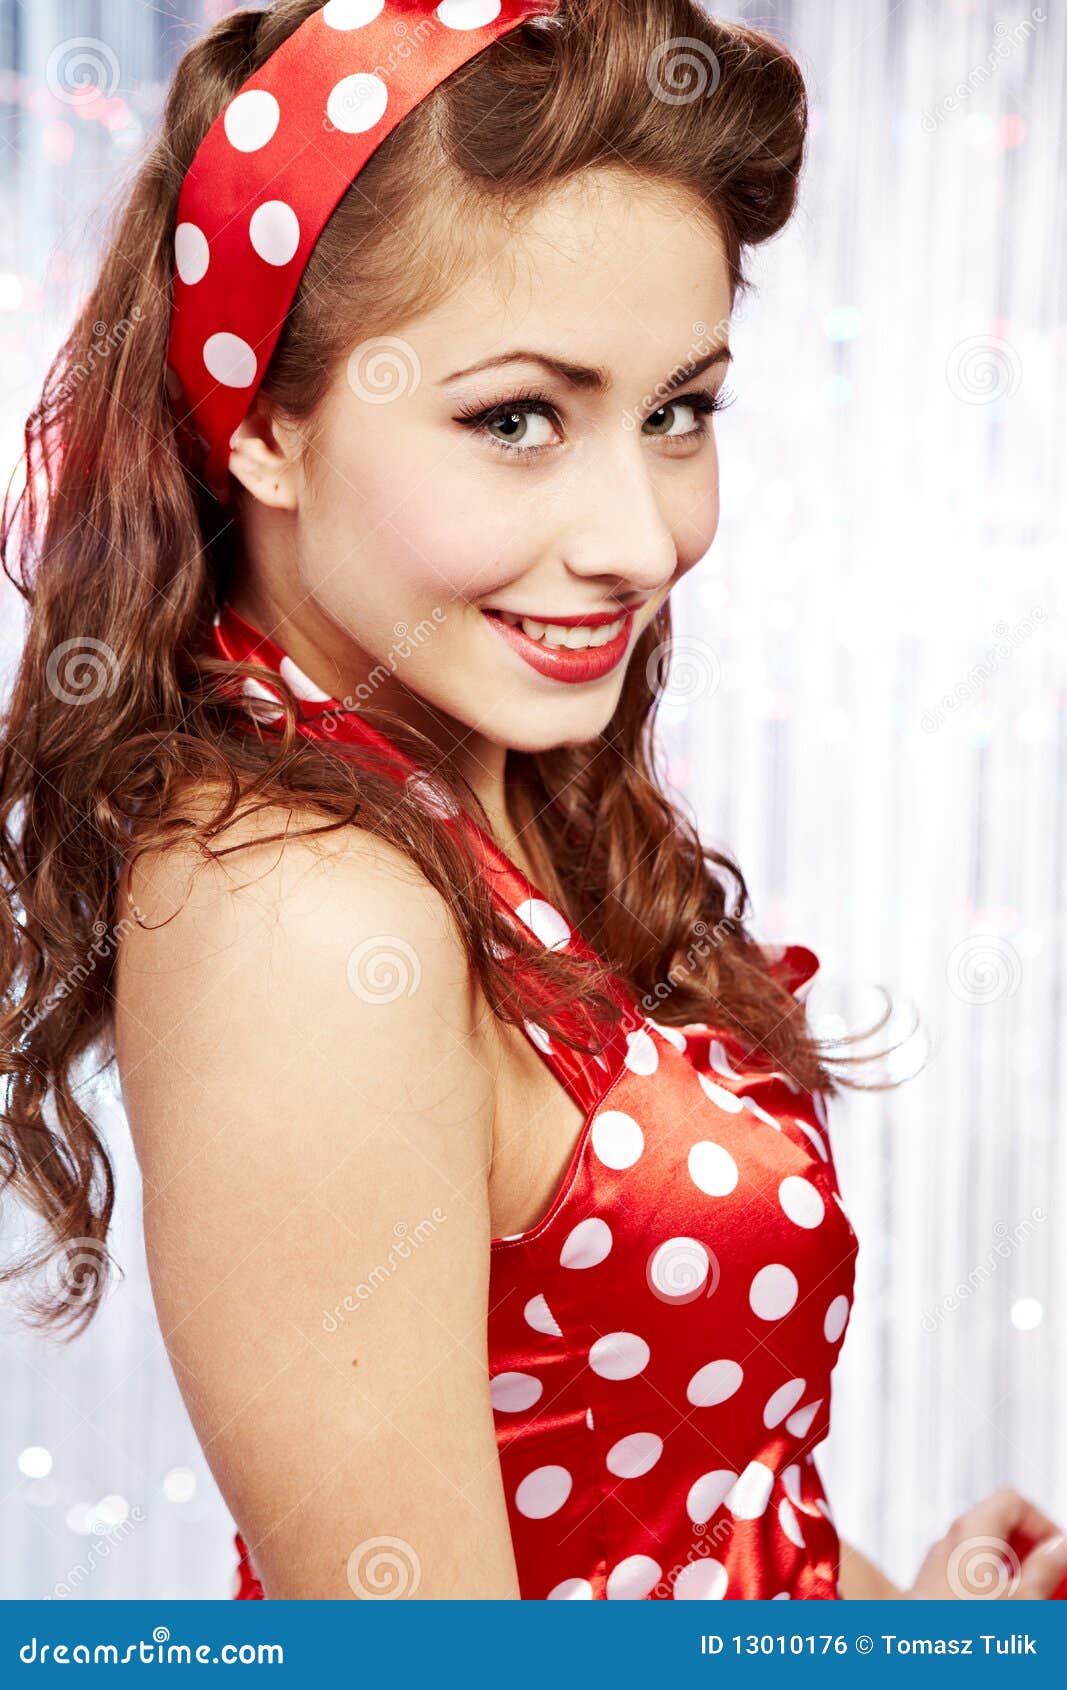 Pretty Sexy Pin Up Women Royalty Free Stock Image Image 13010176